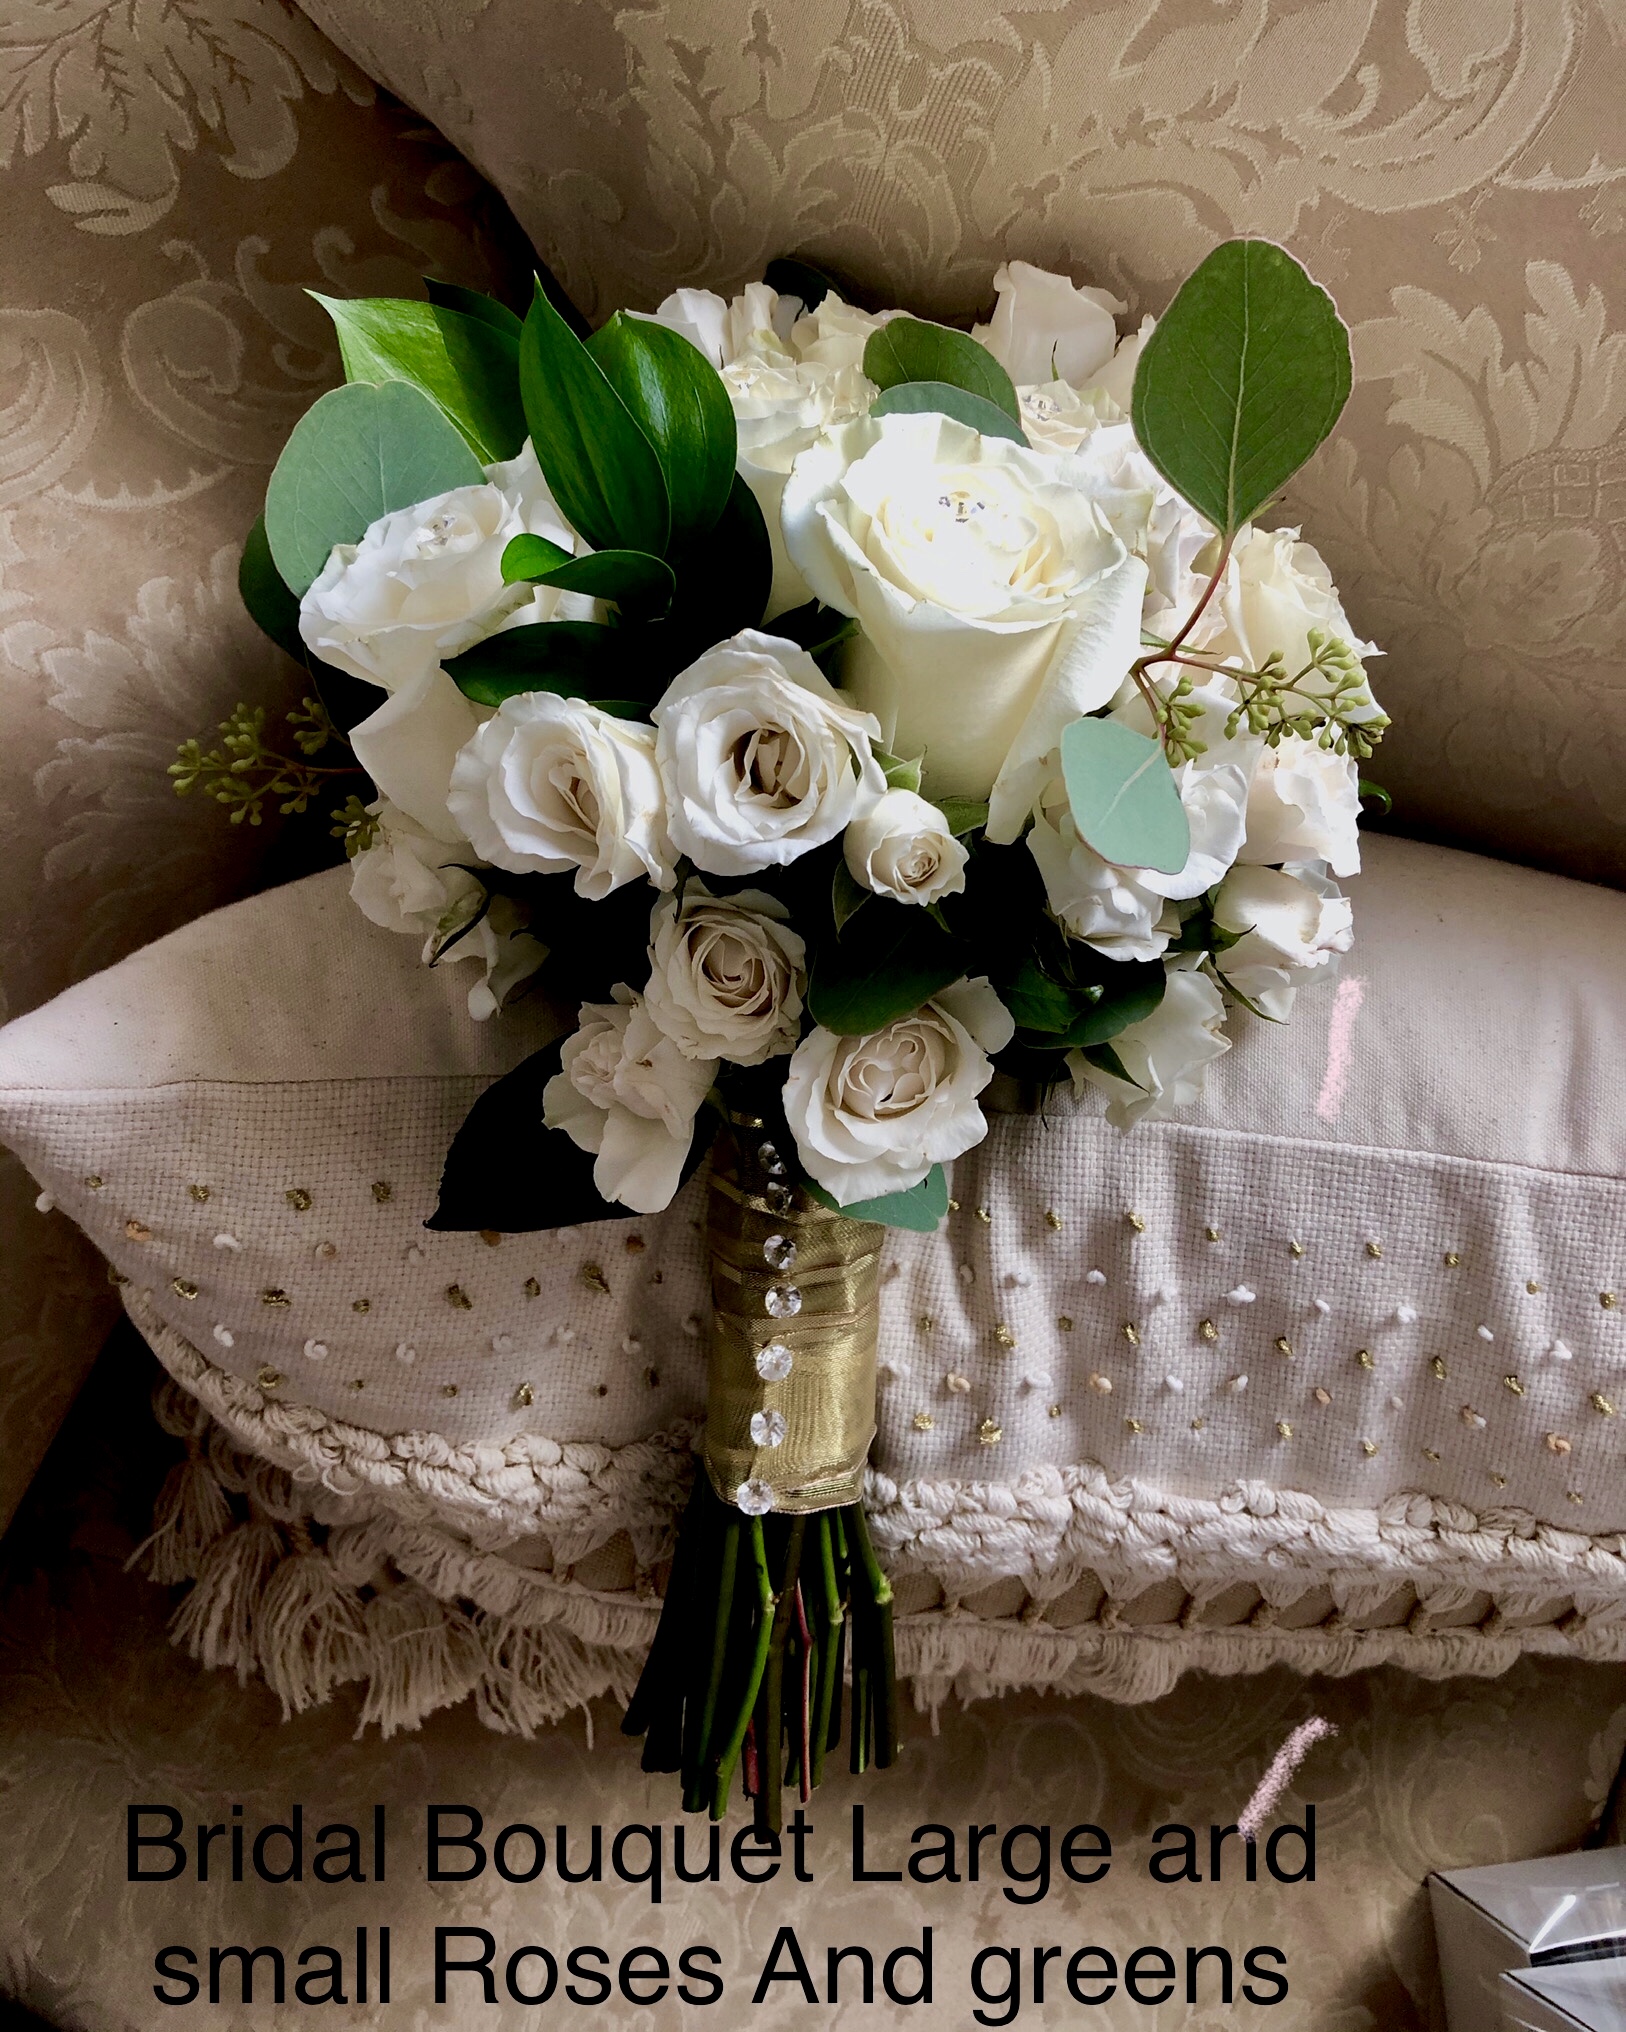 Bridal Bouquet Large and Small Roses and Greens 